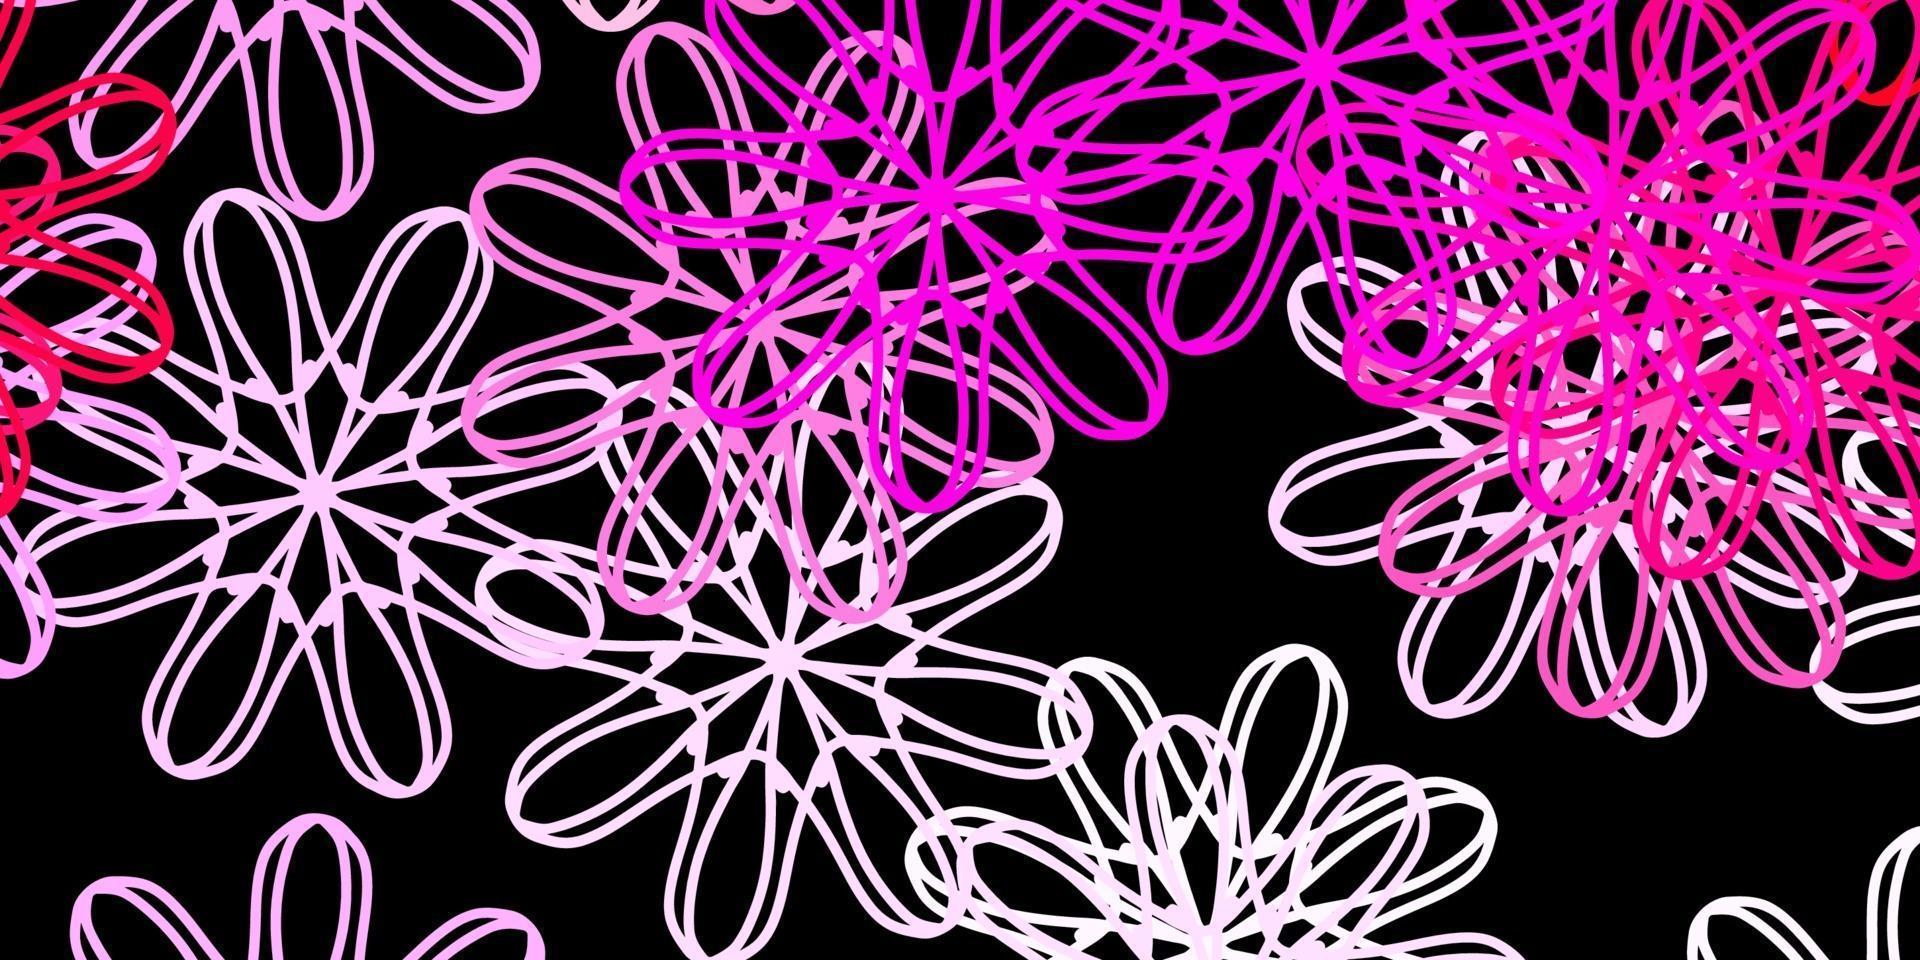 Dark Pink vector pattern with abstract shapes.